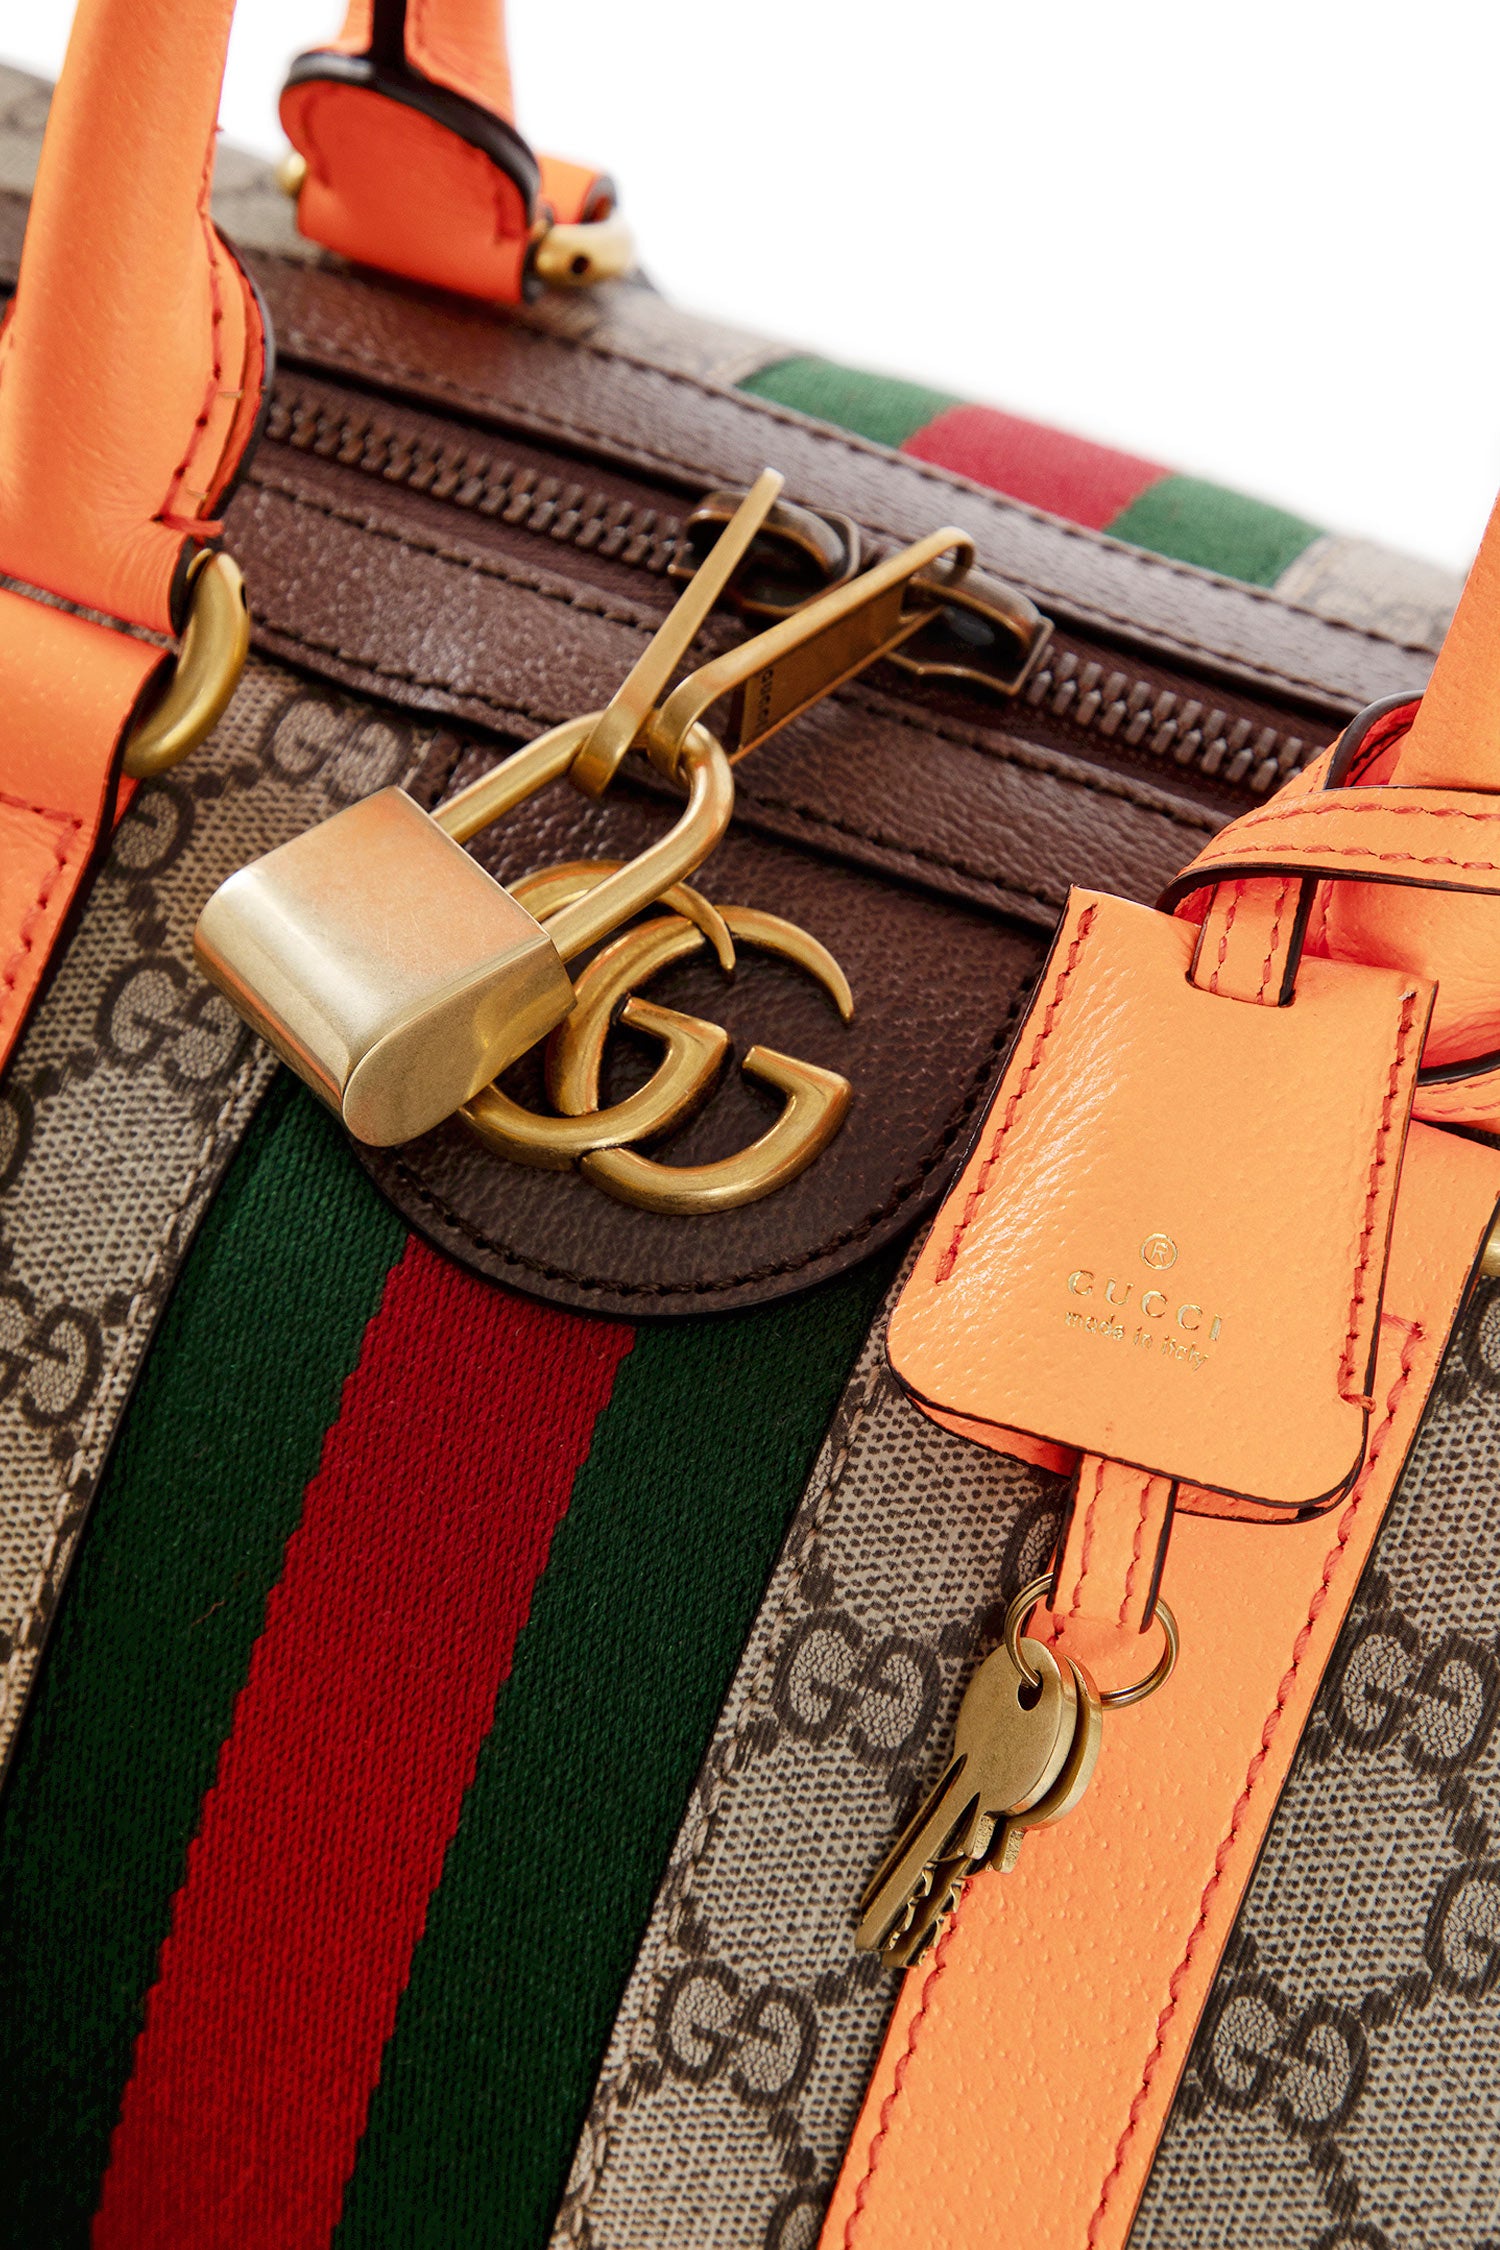 GUCCI MAN MULTICOLOR BACKPACKS & TRAVEL BAGS